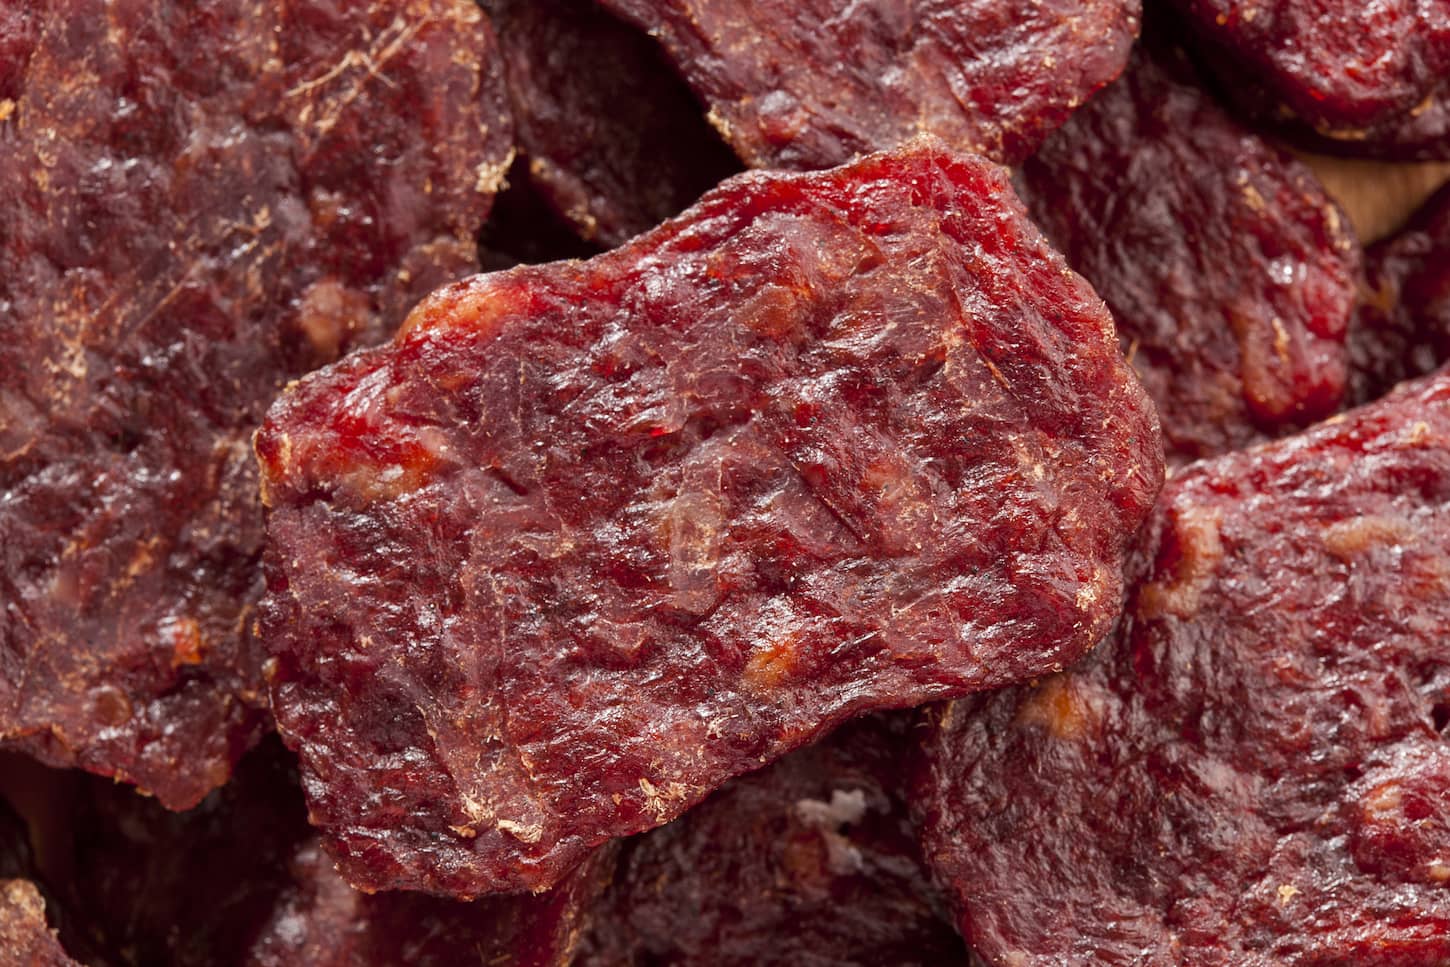 An image of dried processed beef jerky.